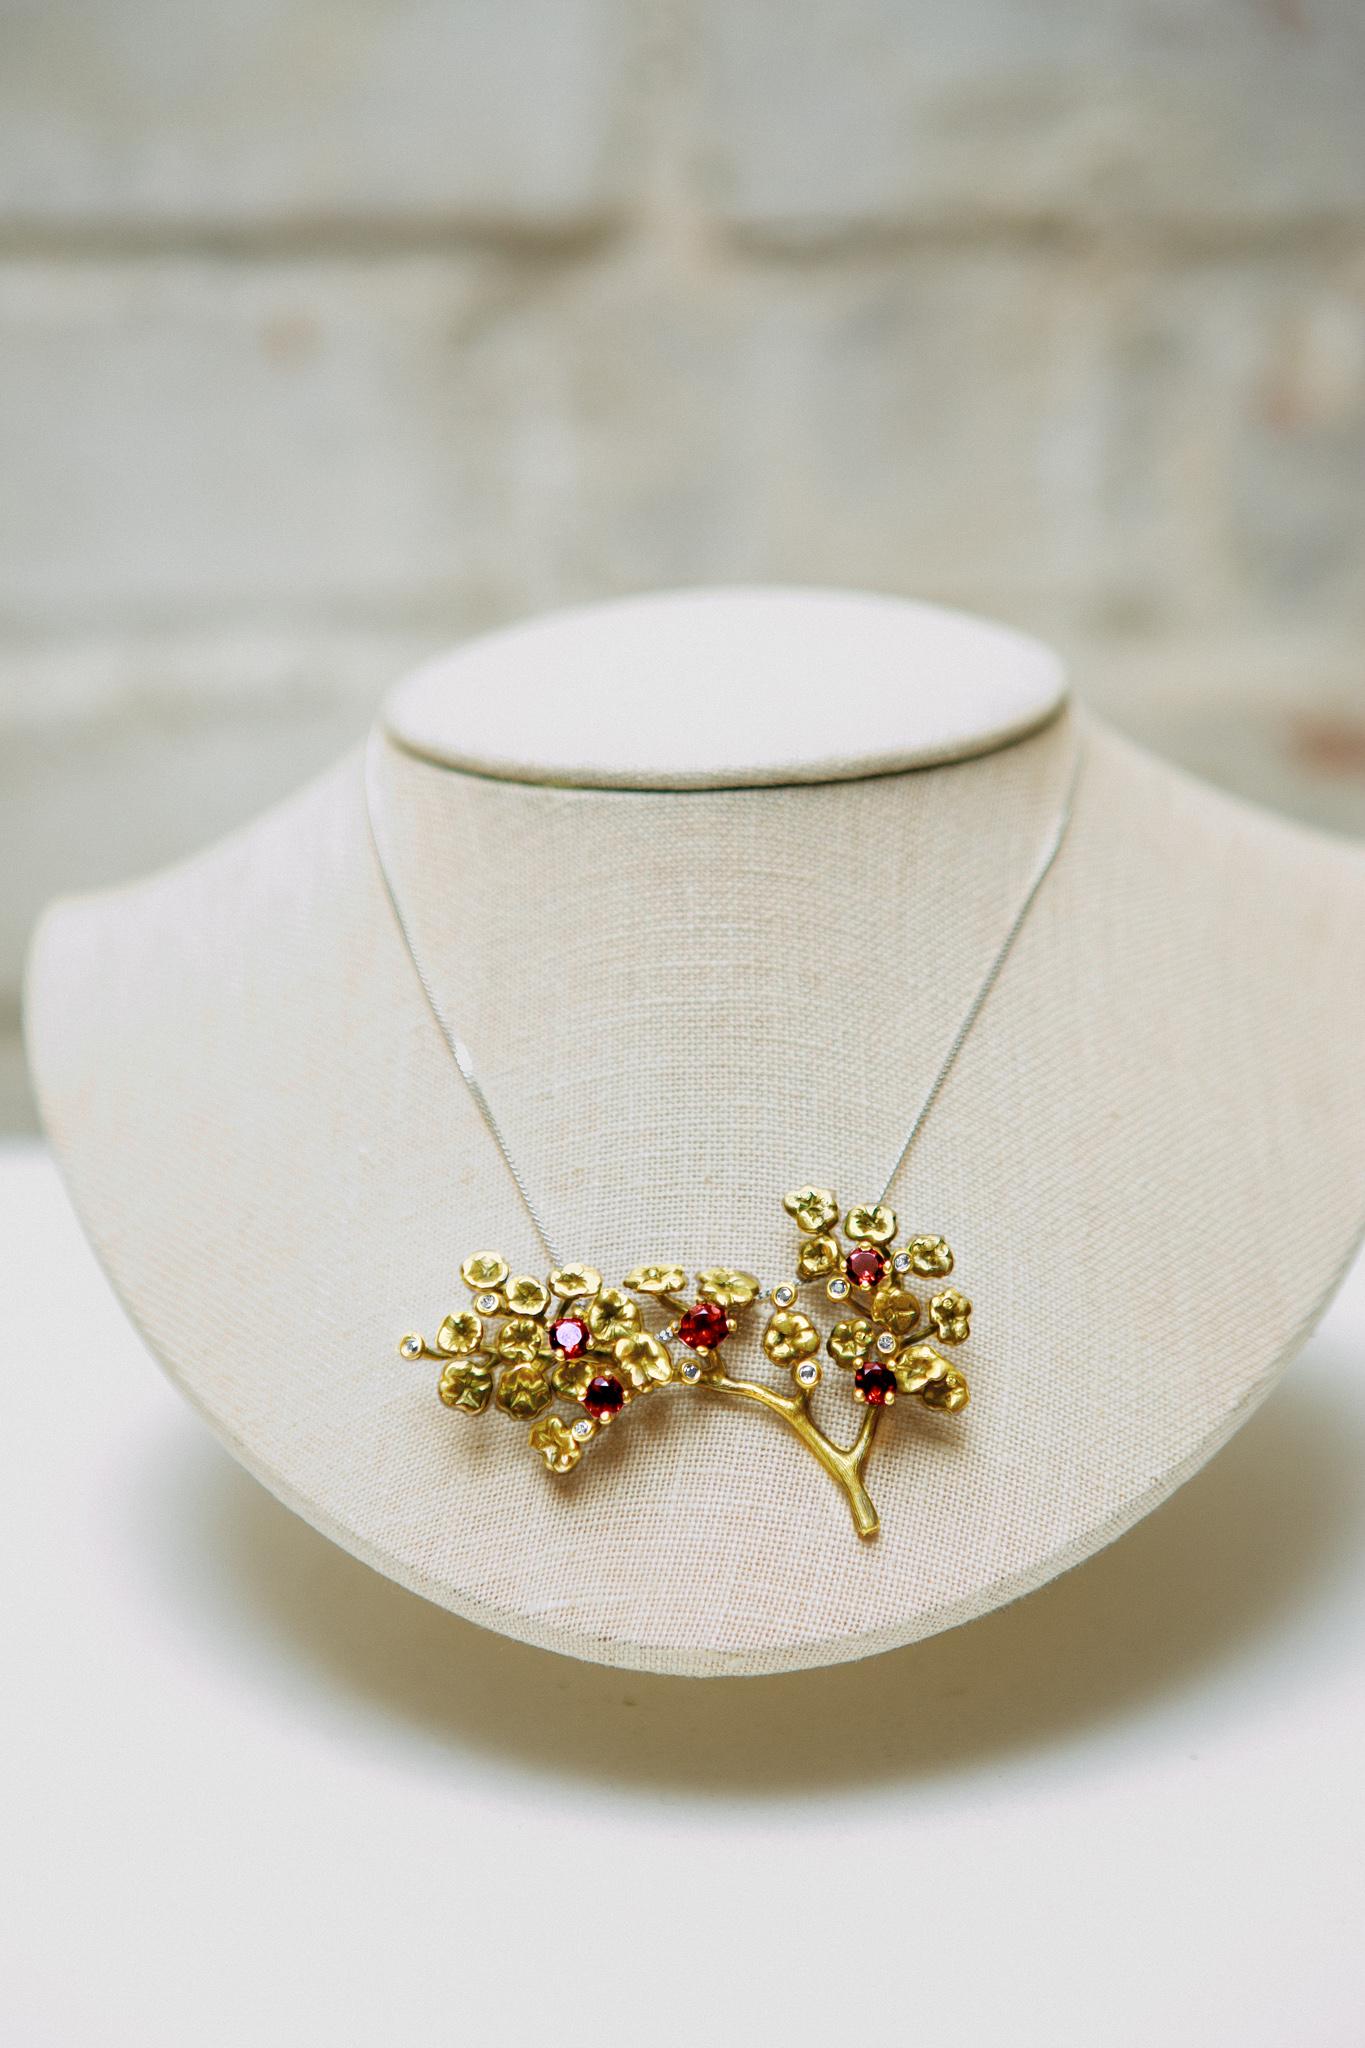 This 18 karat yellow gold Heliotrope necklace is a jewelry art object, designed by the oil painter from Berlin, Polya Medvedeva.

The necklace is 70 cm long and can be ordered with multiple choices of precious gems. This necklace is encrusted with